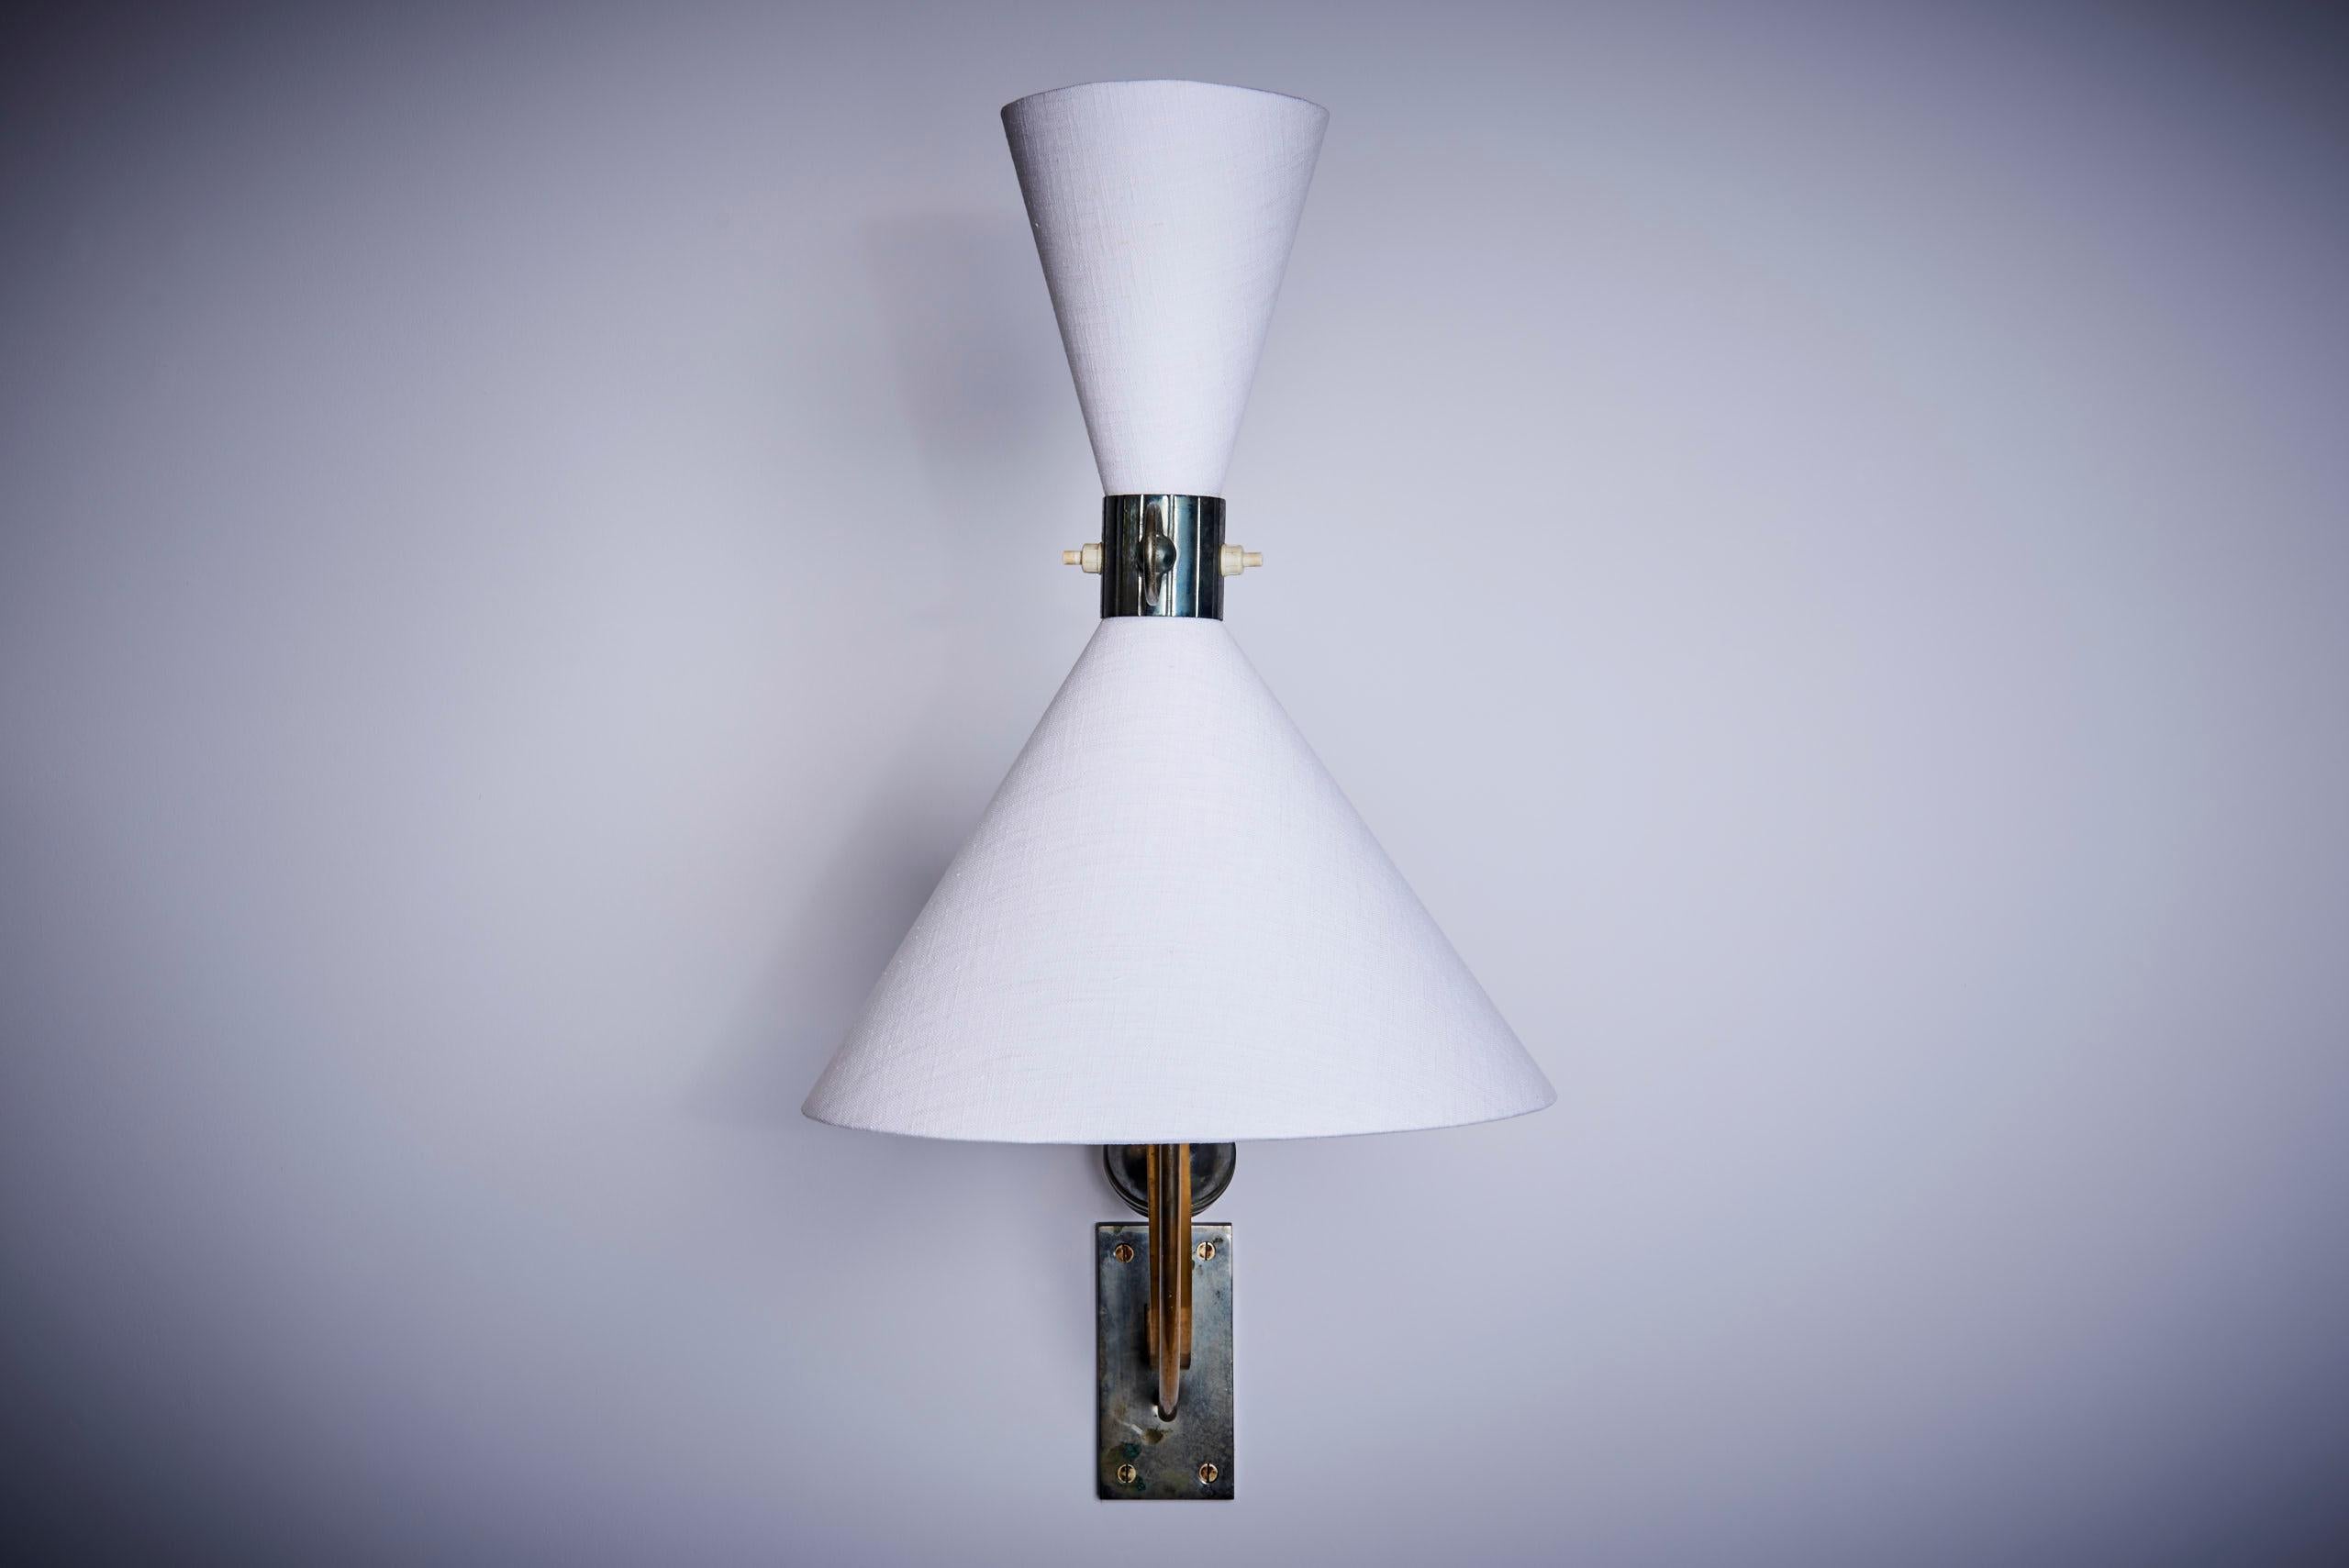 Counterweight Wall Lamp with adjustable height, 1950s - France For Sale 2